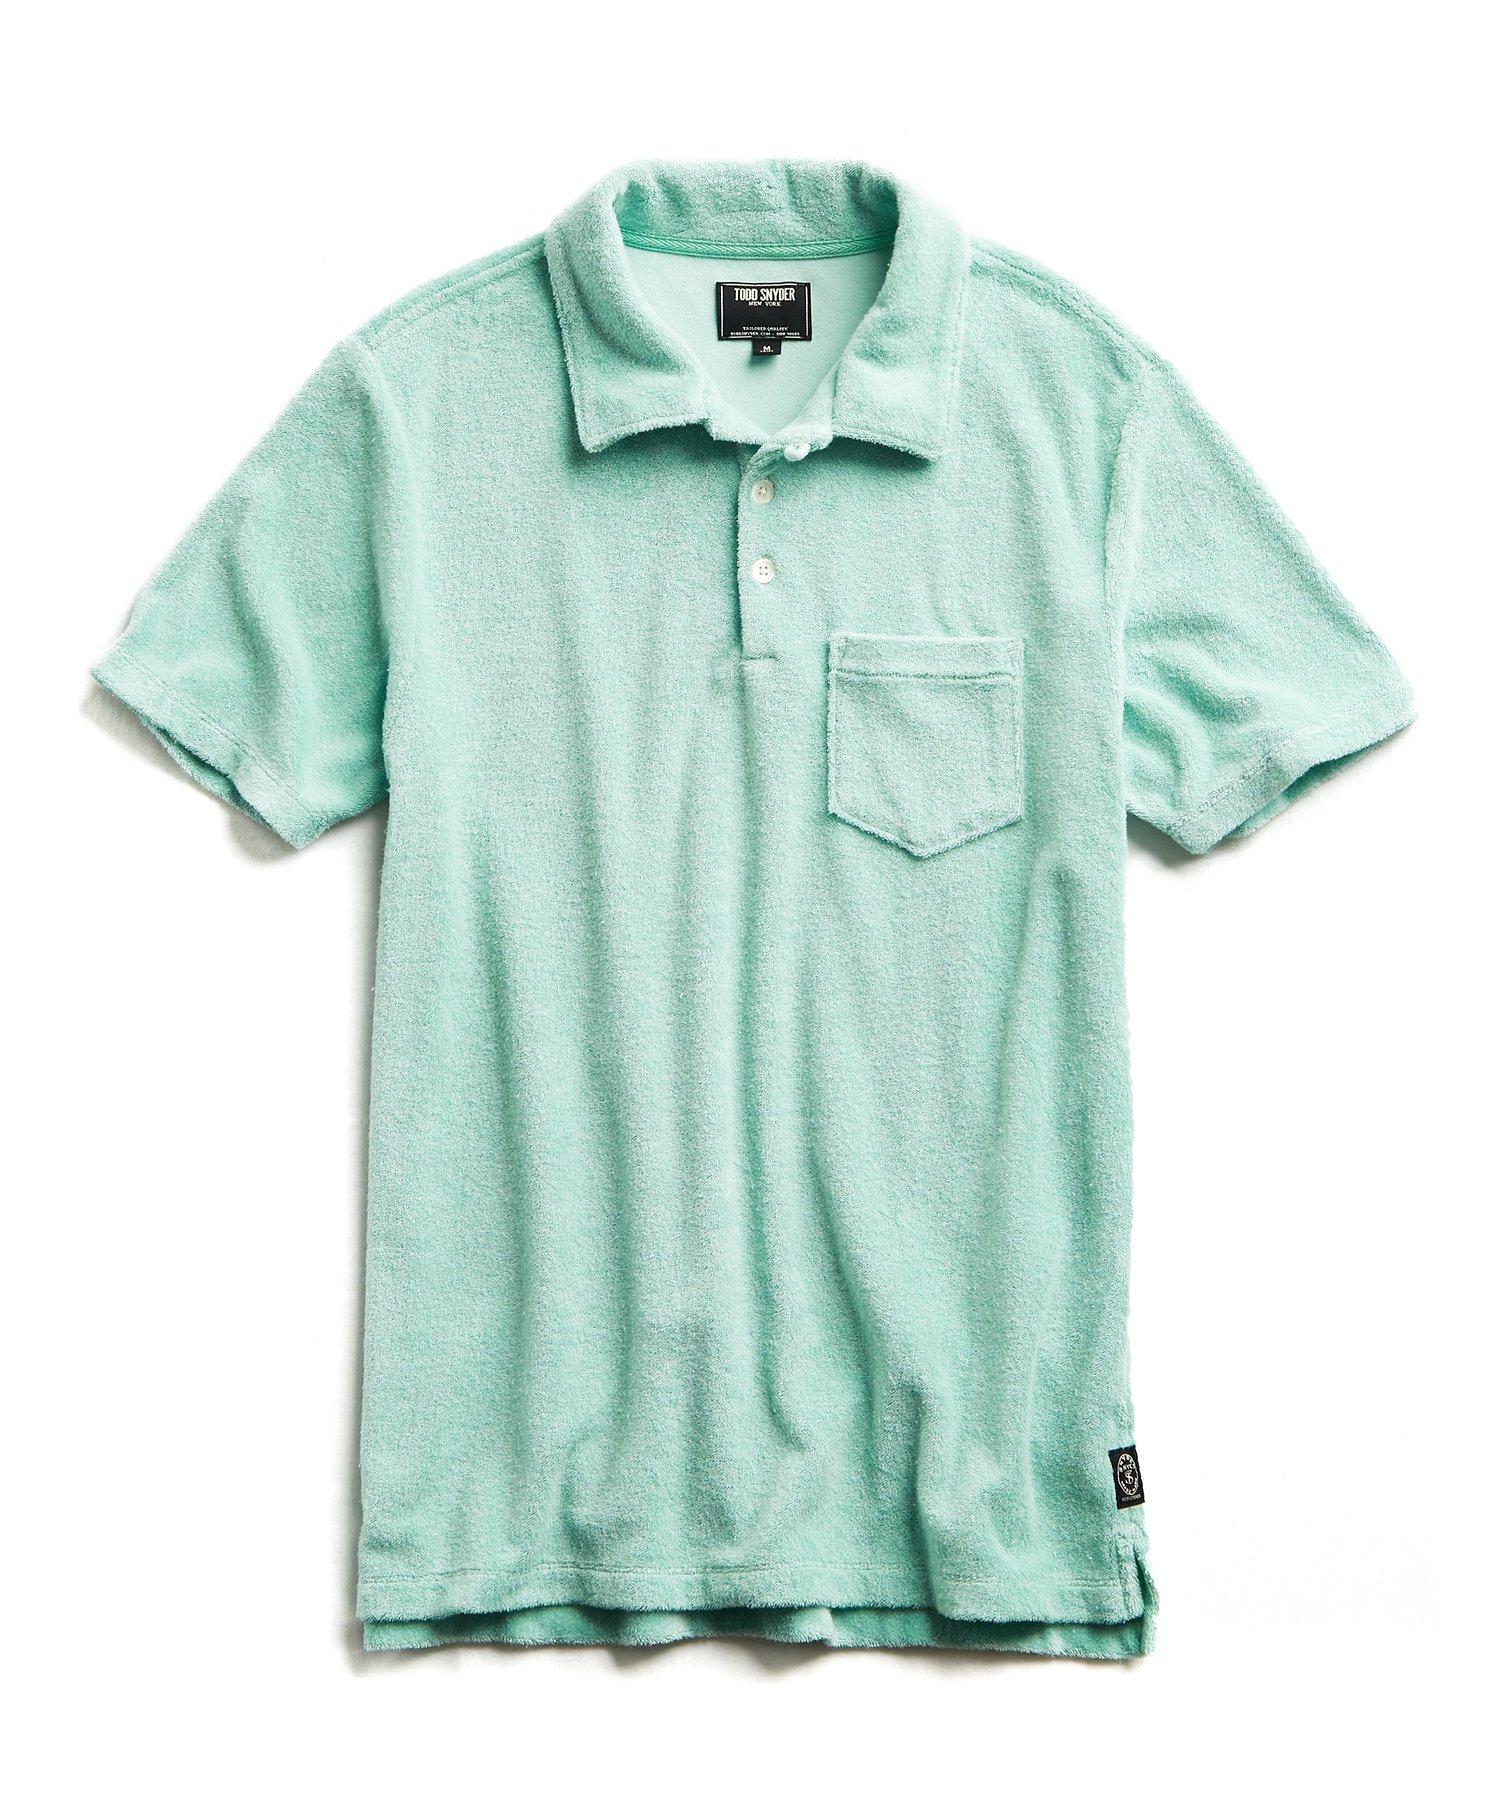 Todd Synder X Champion Cotton Terry Polo In Minty Green for Men - Lyst